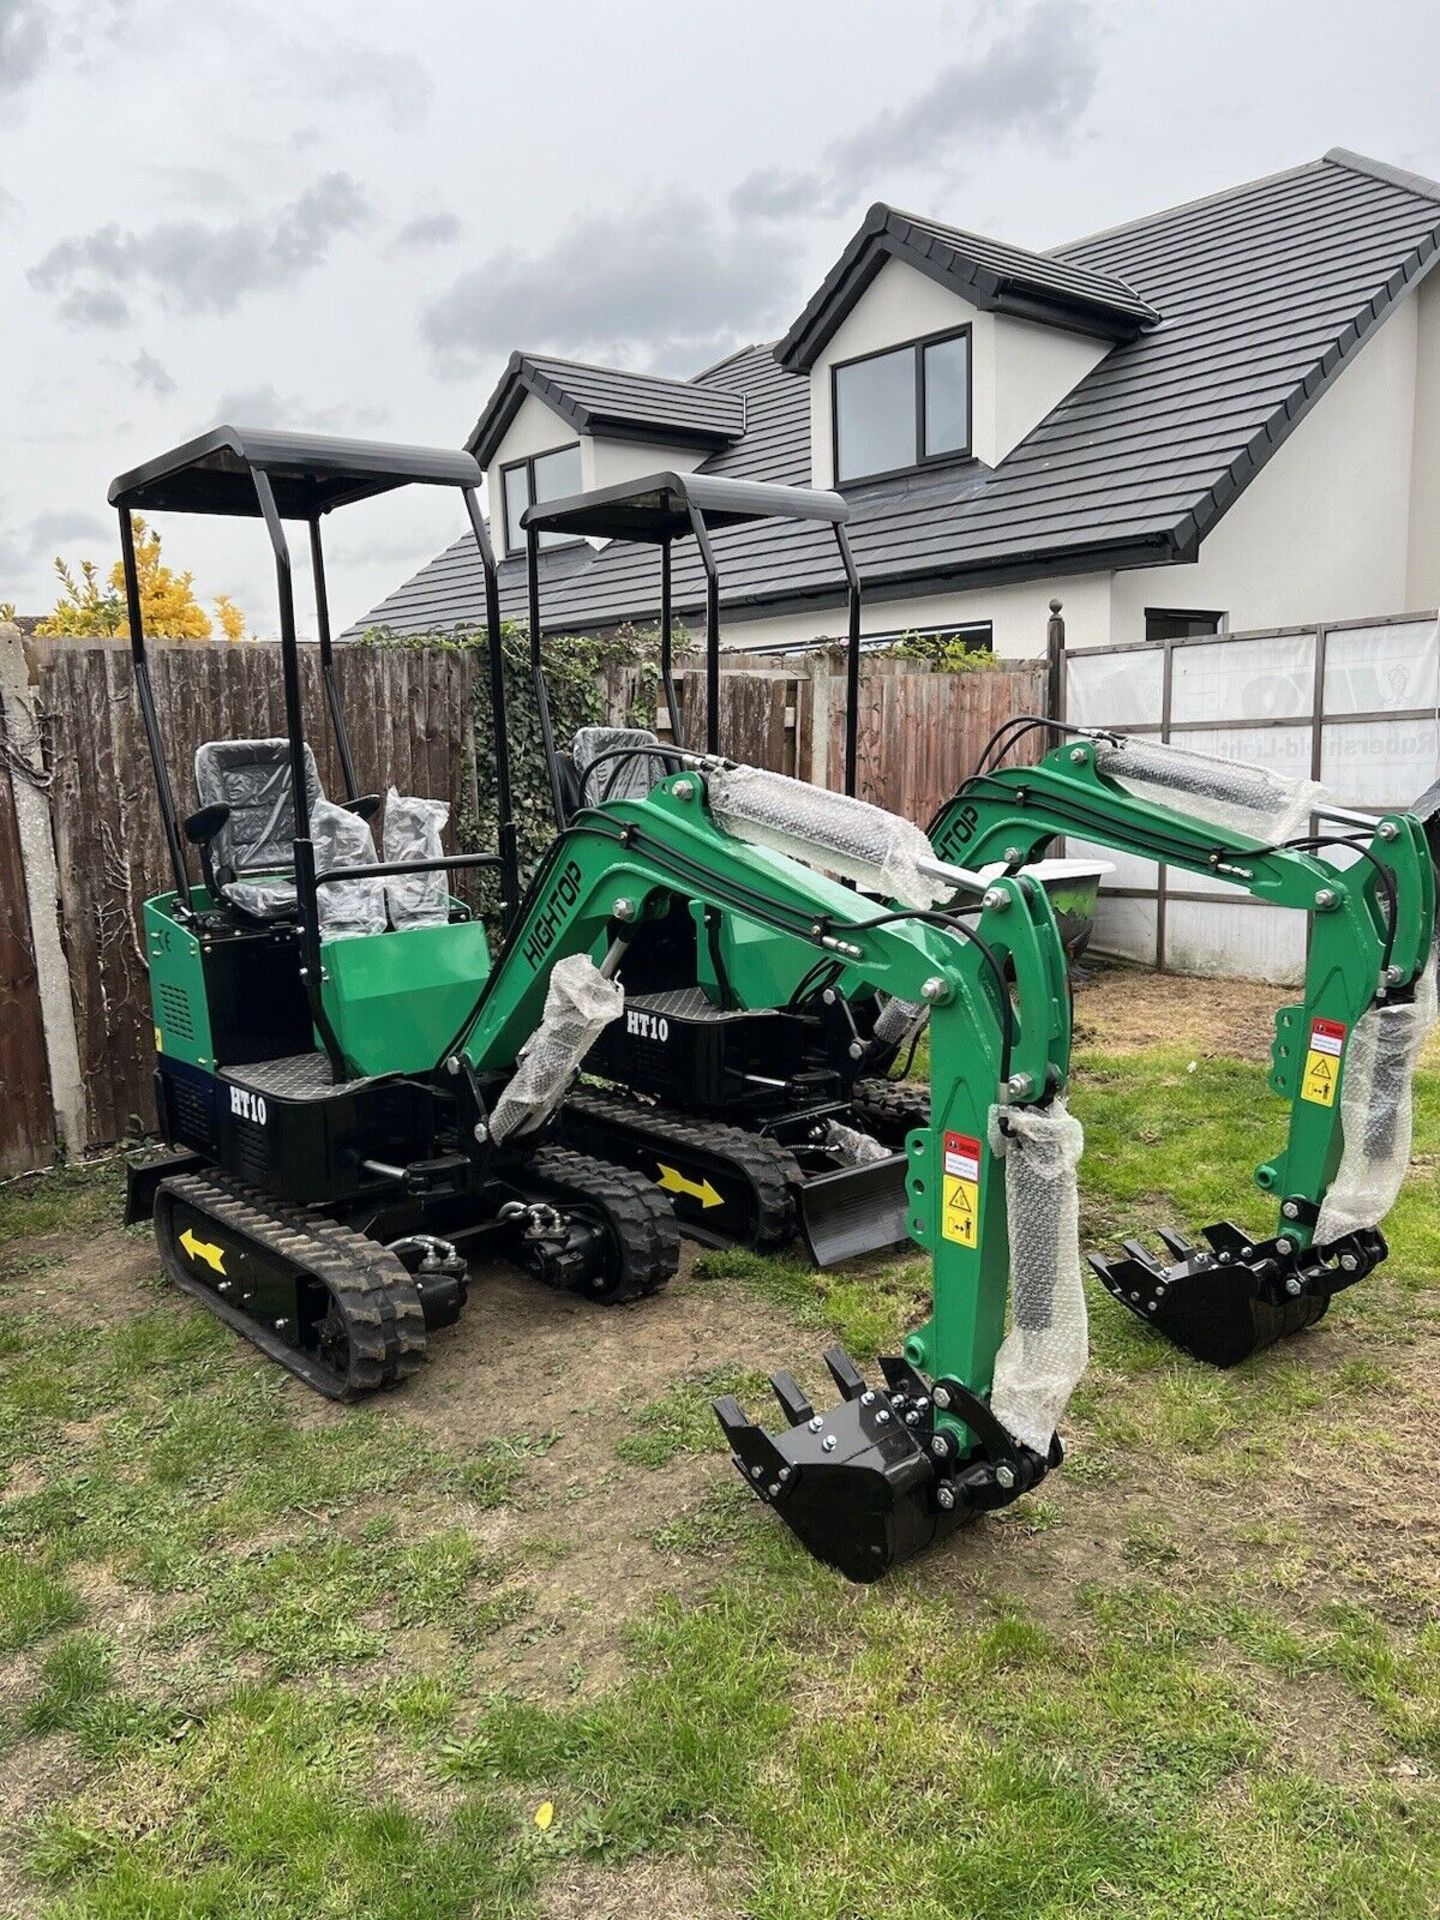 BRAND NEW HIGHTOP HT10 MINI DIGGER EXCAVATOR 1 TON WITH BOOM SWING & 3 BUCKETS - Image 11 of 11